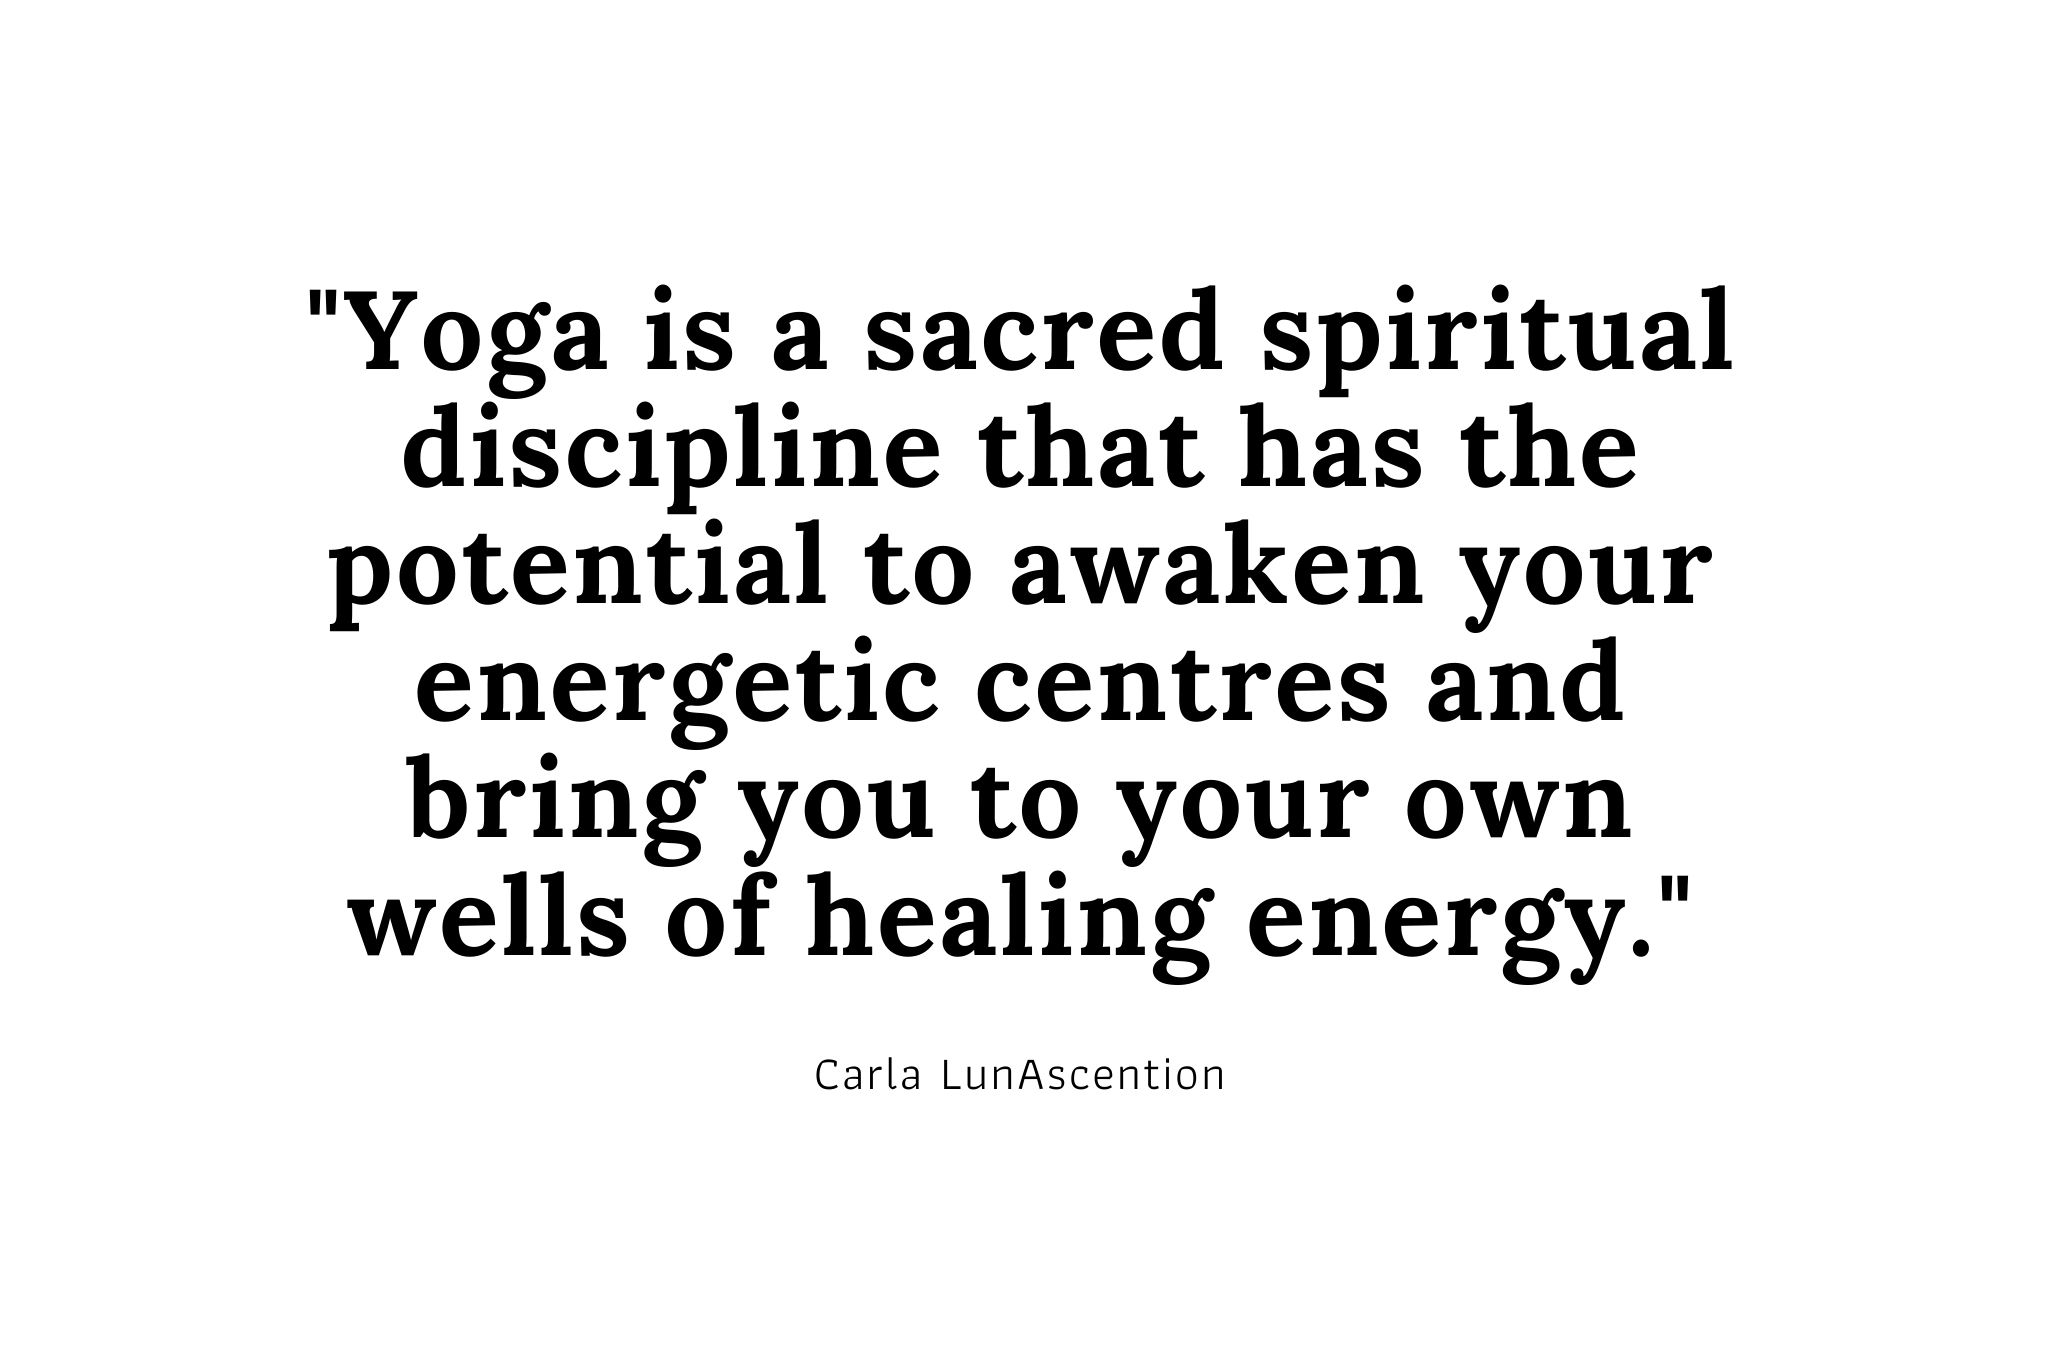 "Yoga is a sacred spiritual discipline that has the potential to awaken your energetic centres and bring you to your own wells of healing energy." Psychic Yoga Teacher Carla LunAscention